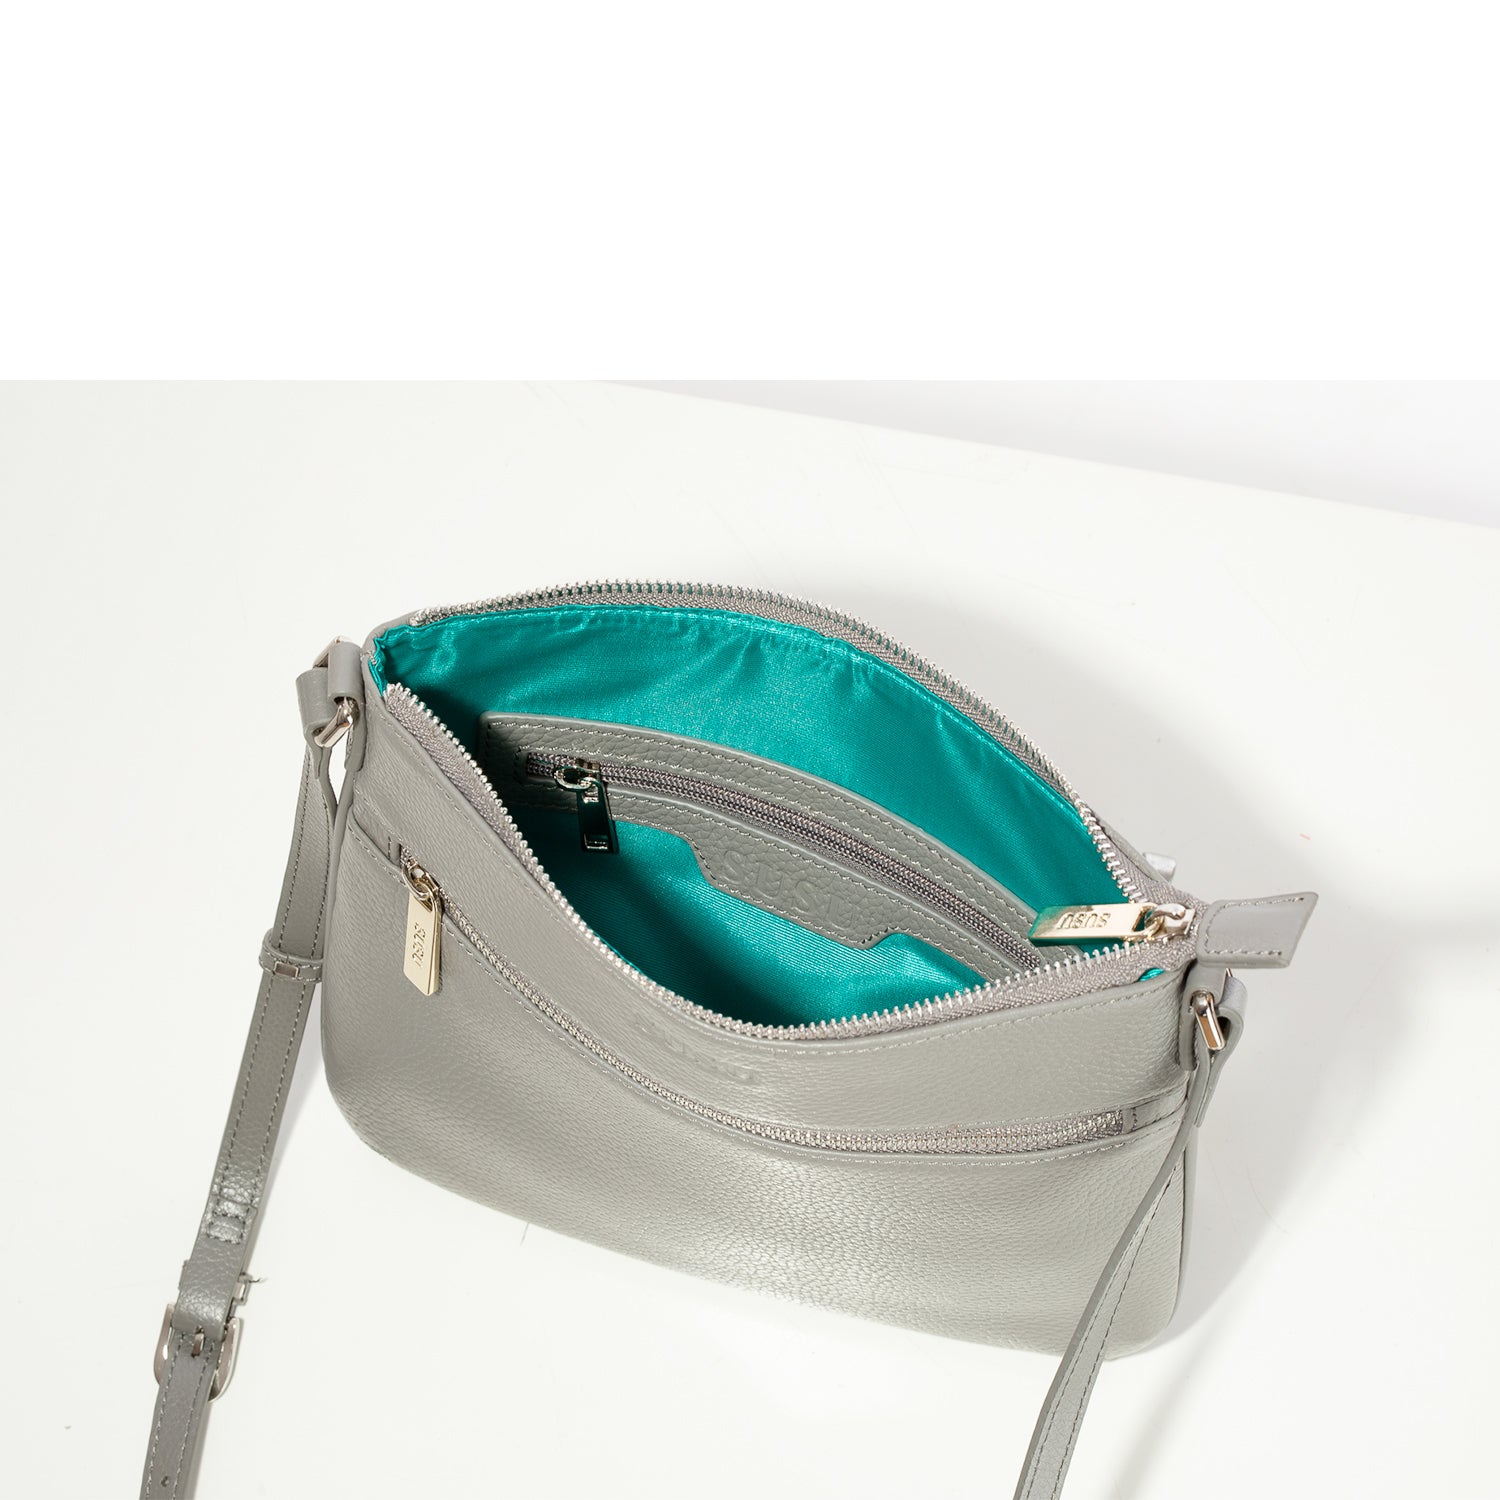 Gray Leather Crossbody Bag - Fashion and Functionality in a Stylish Gray Leather Crossbody Bag